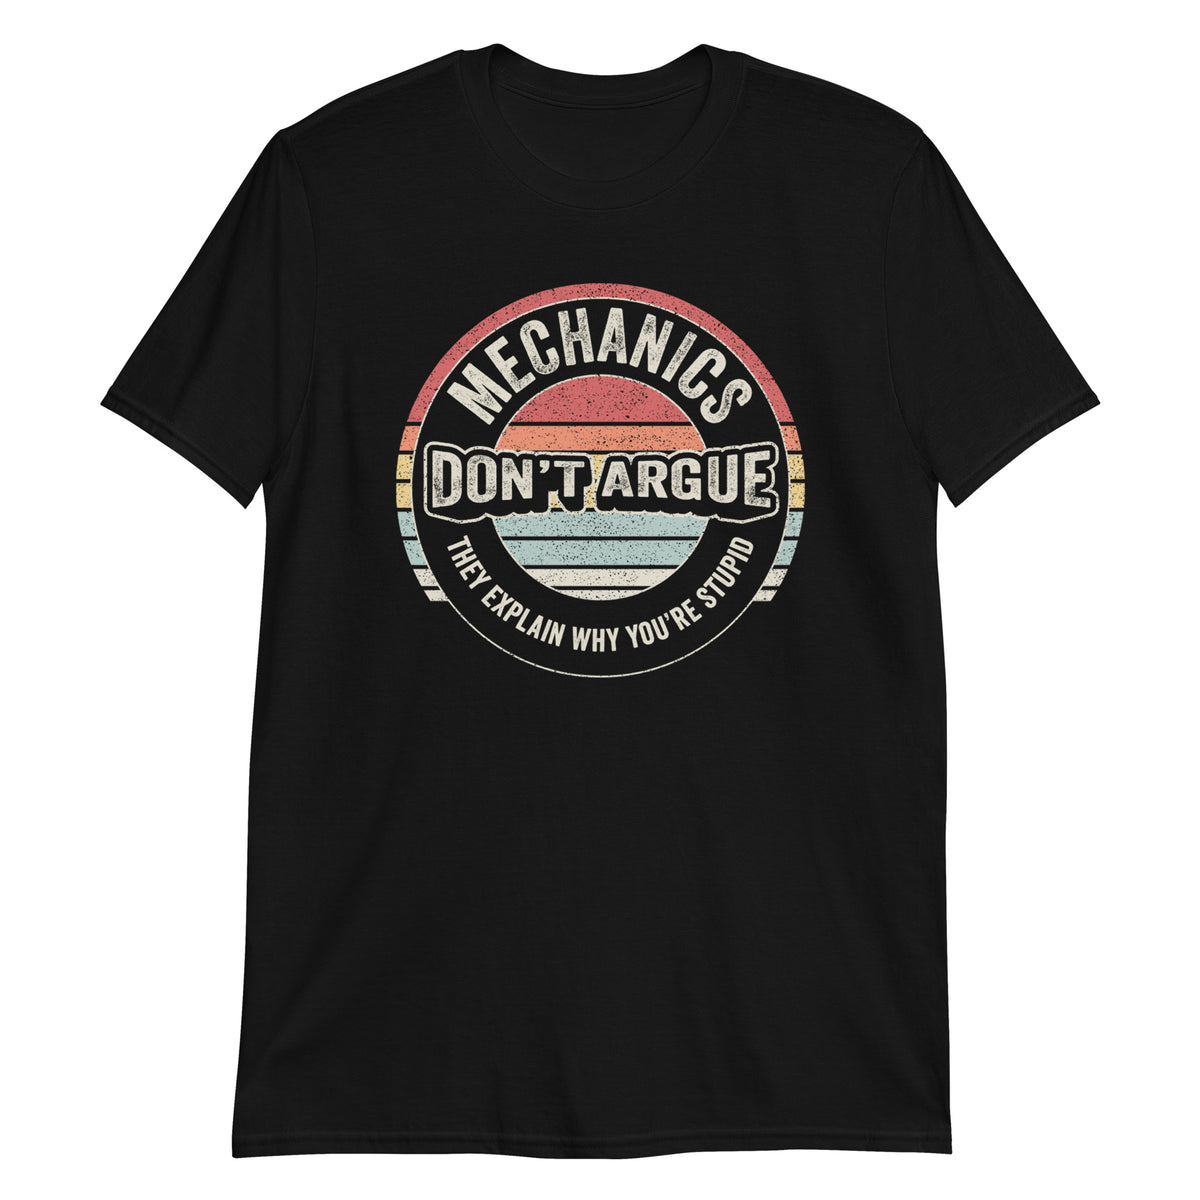 Mechanics Don't Argue They Explain Why You're Stupid T-Shirt